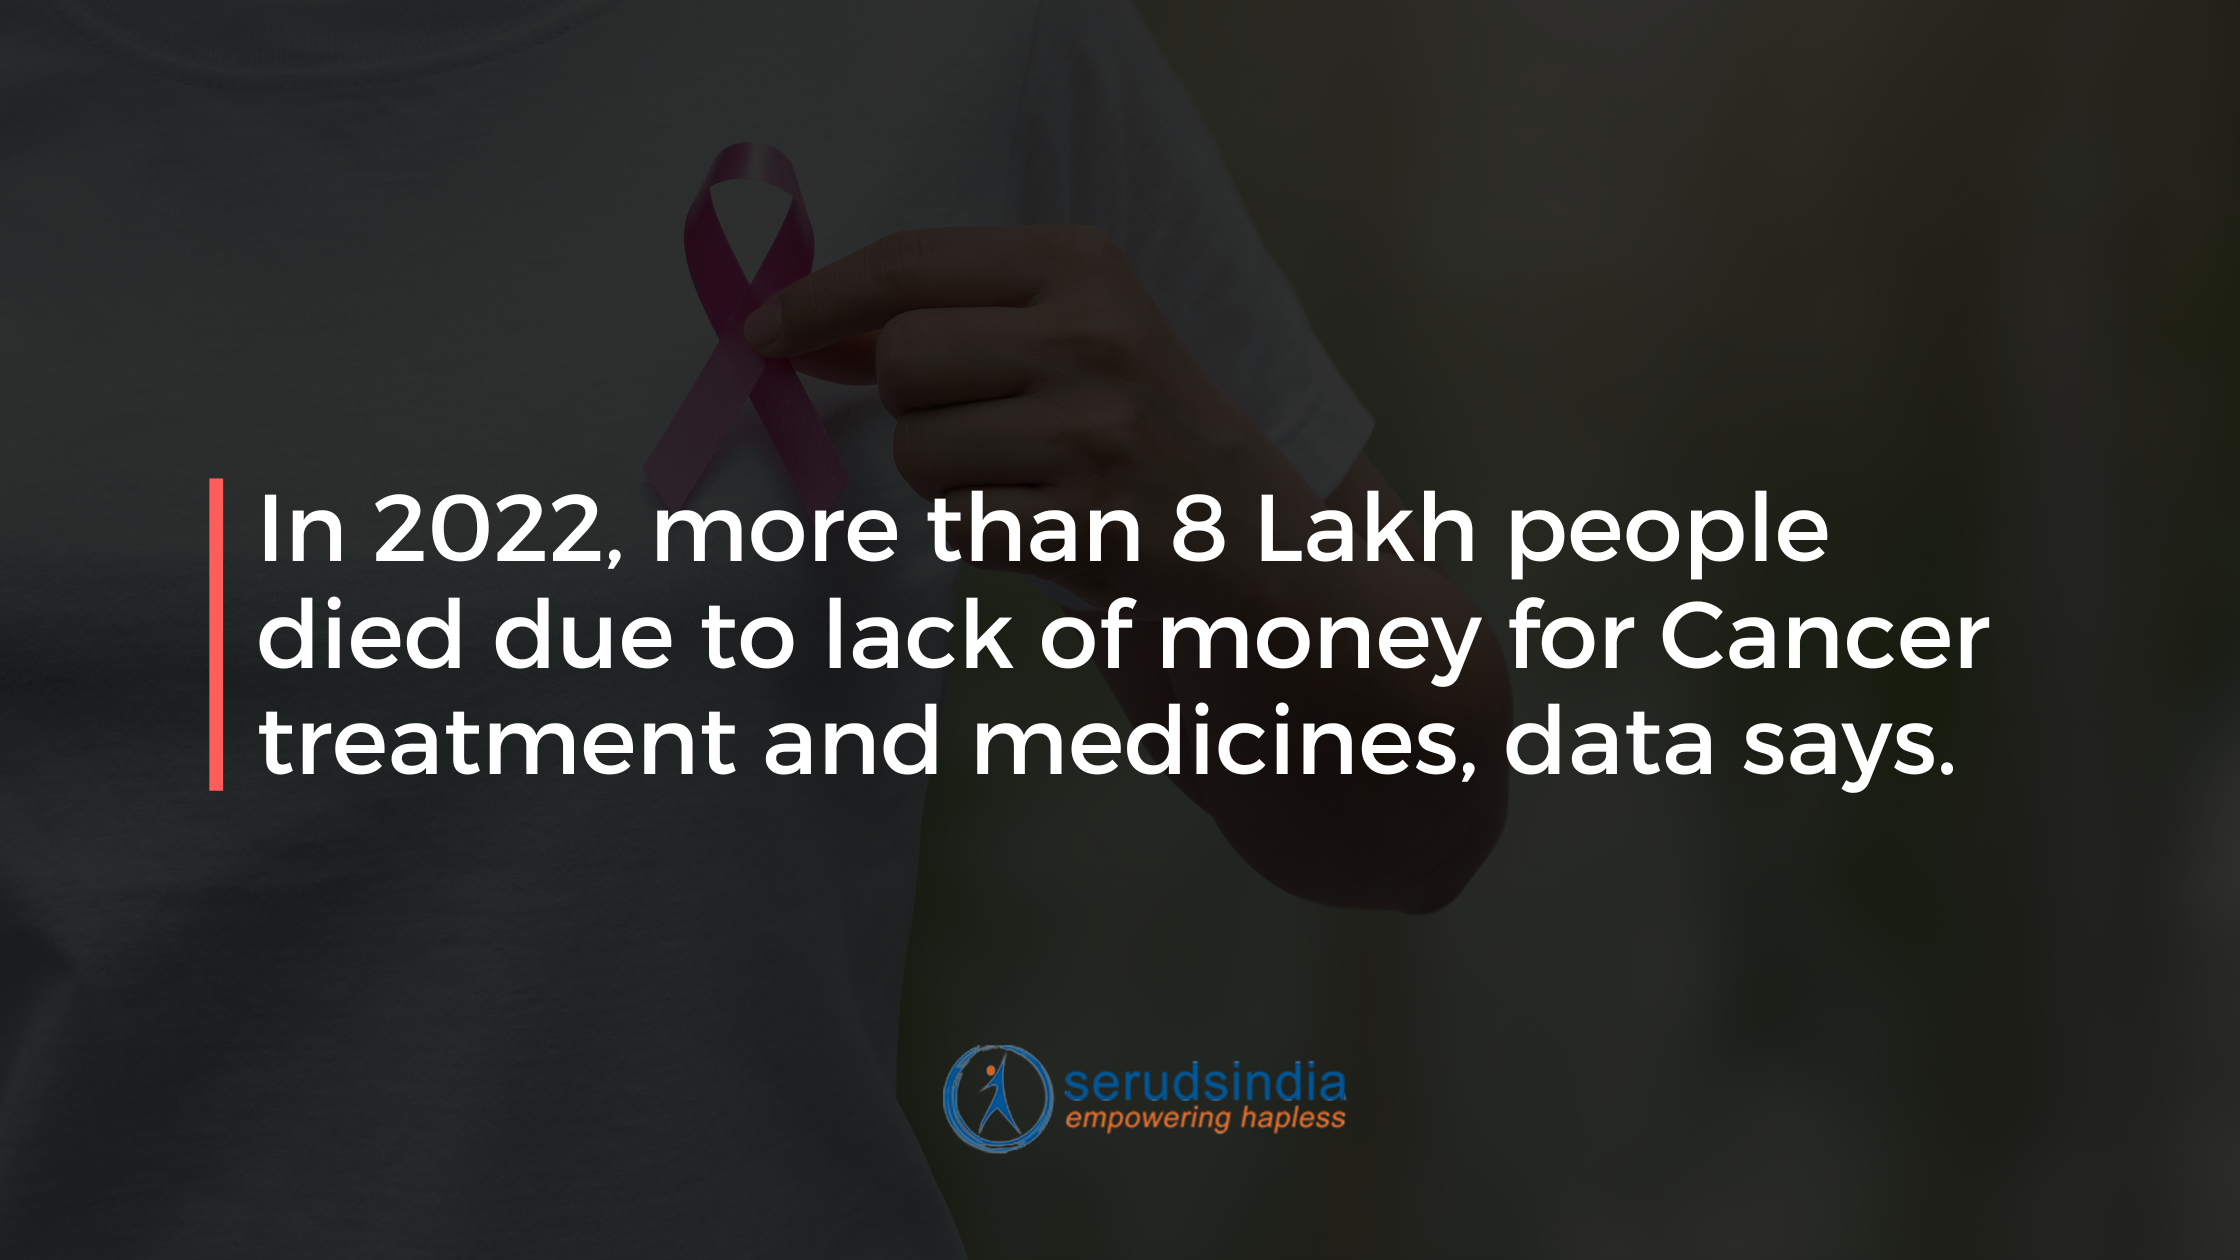 Donate To Help Cancer Patients in India (1)